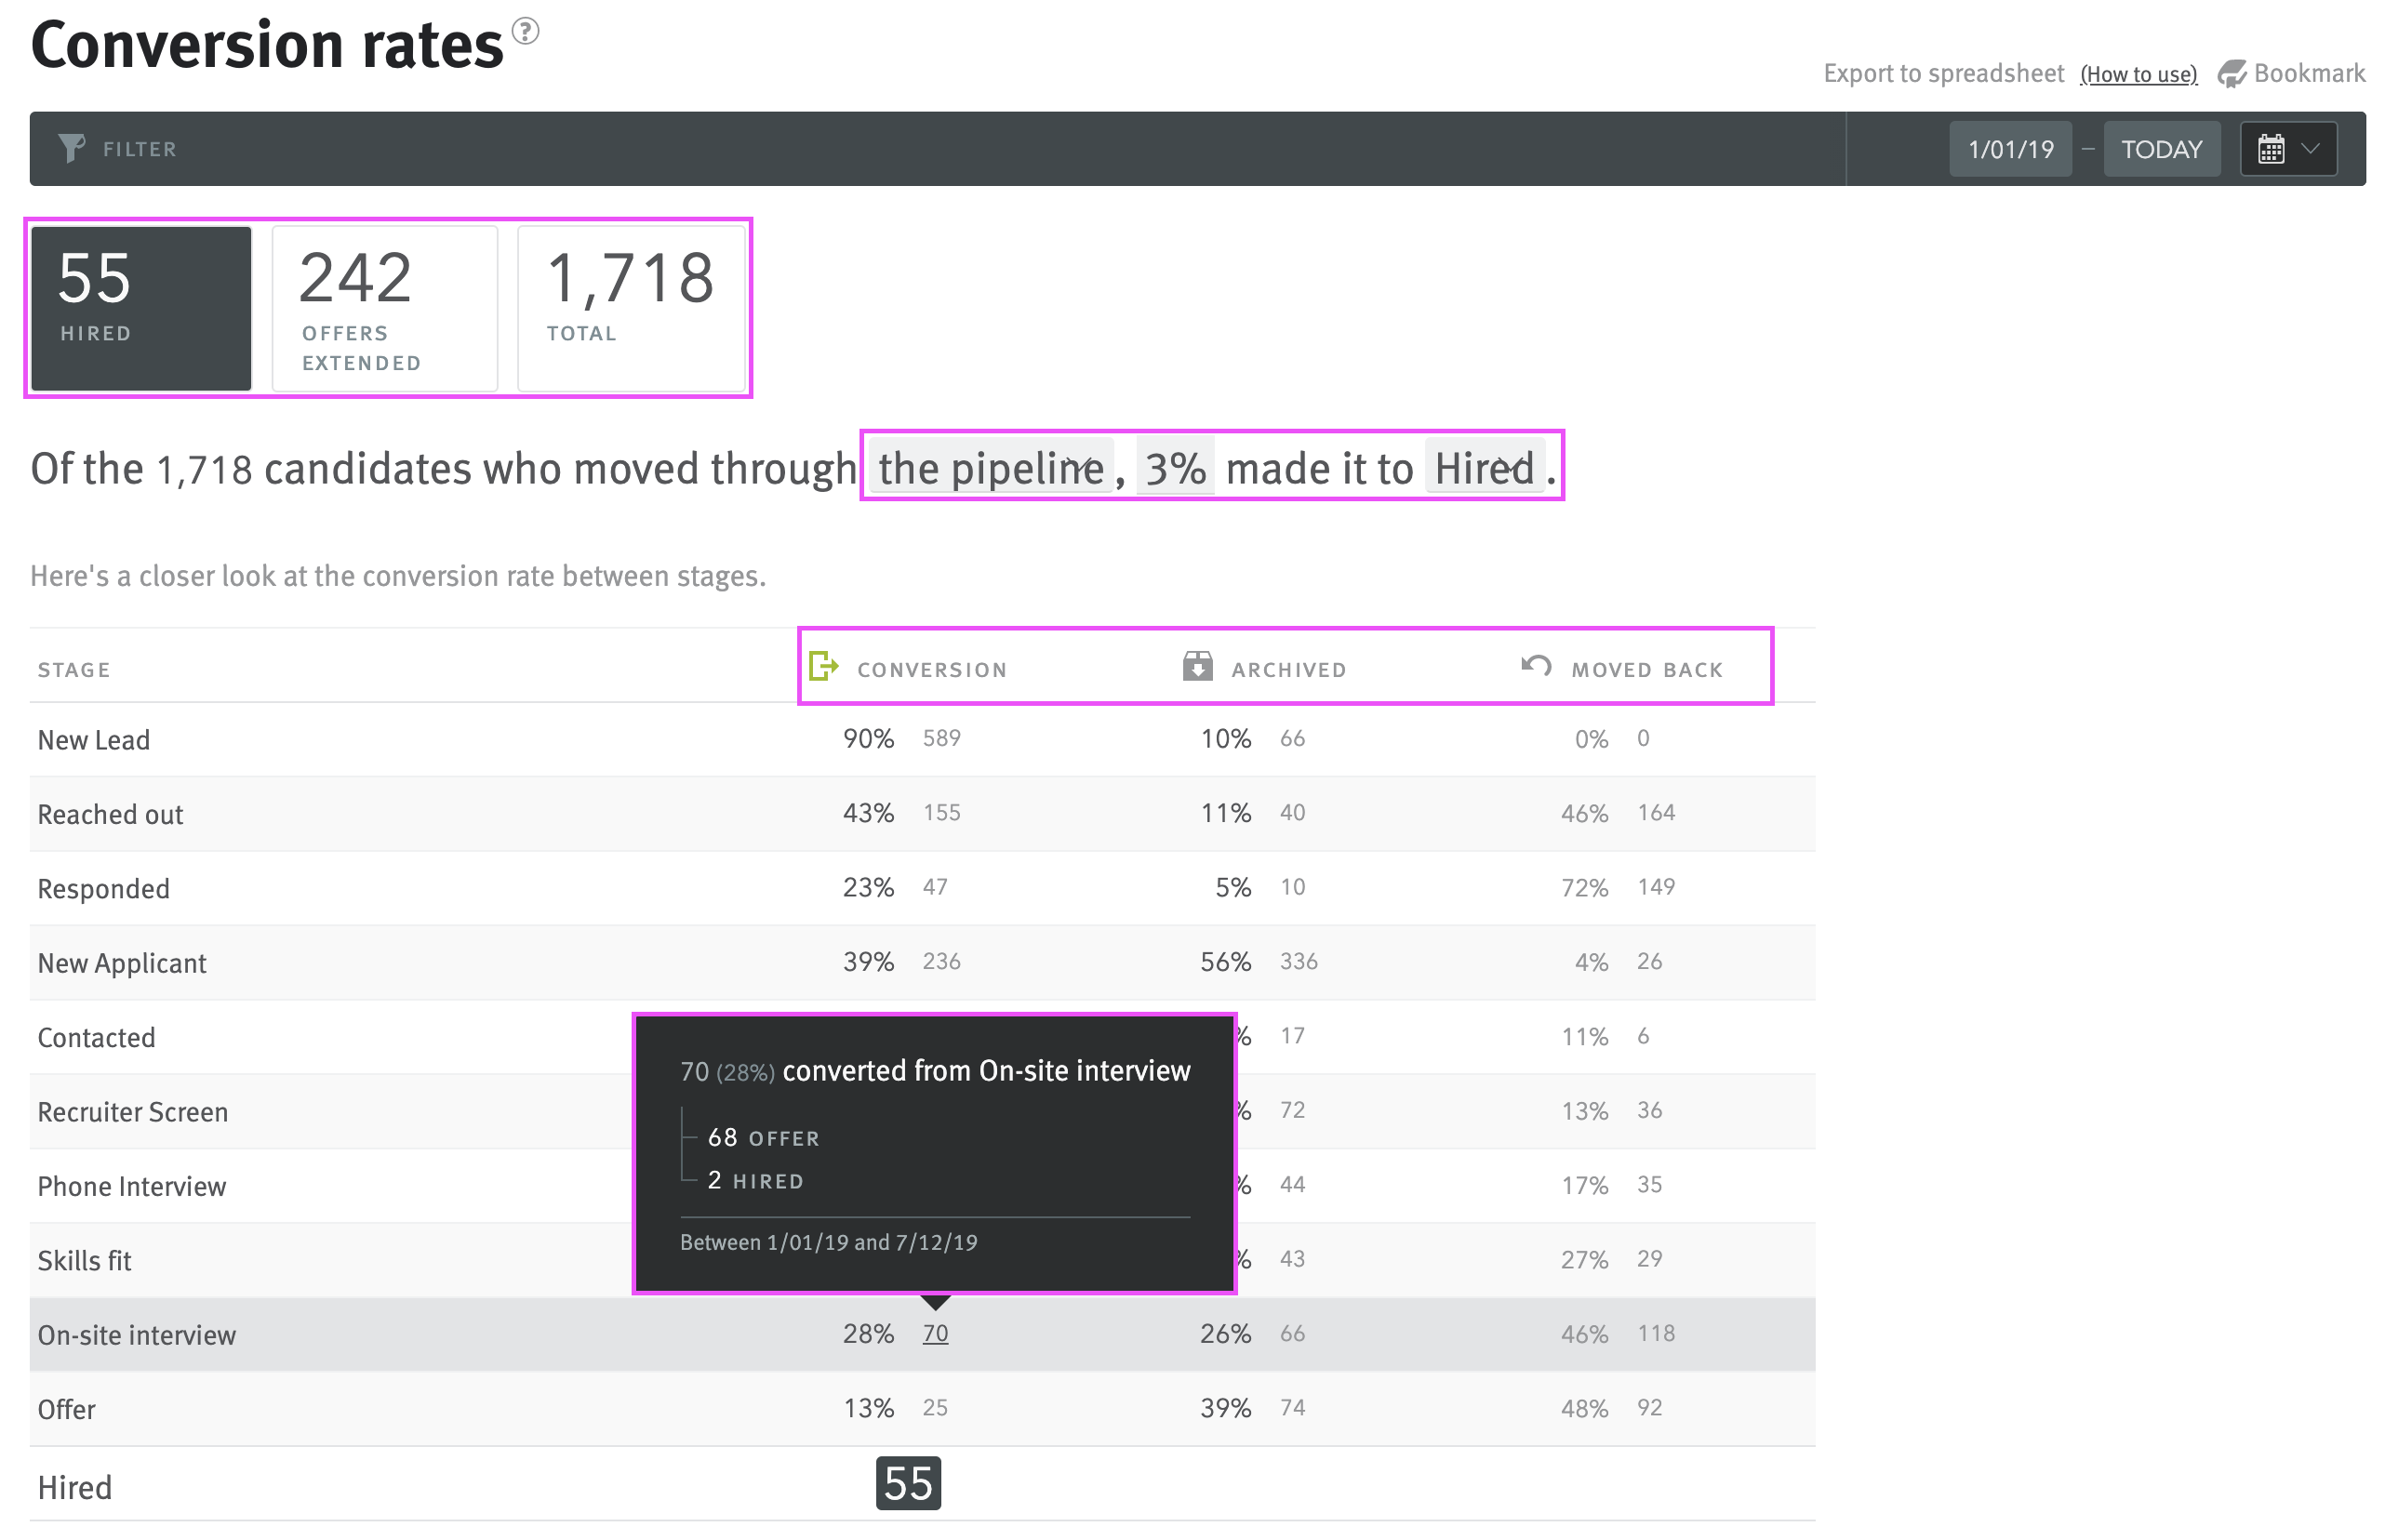 Conversion rates report; Summary statistics, summary sentence, column headers, and movement details pop-up outlined.